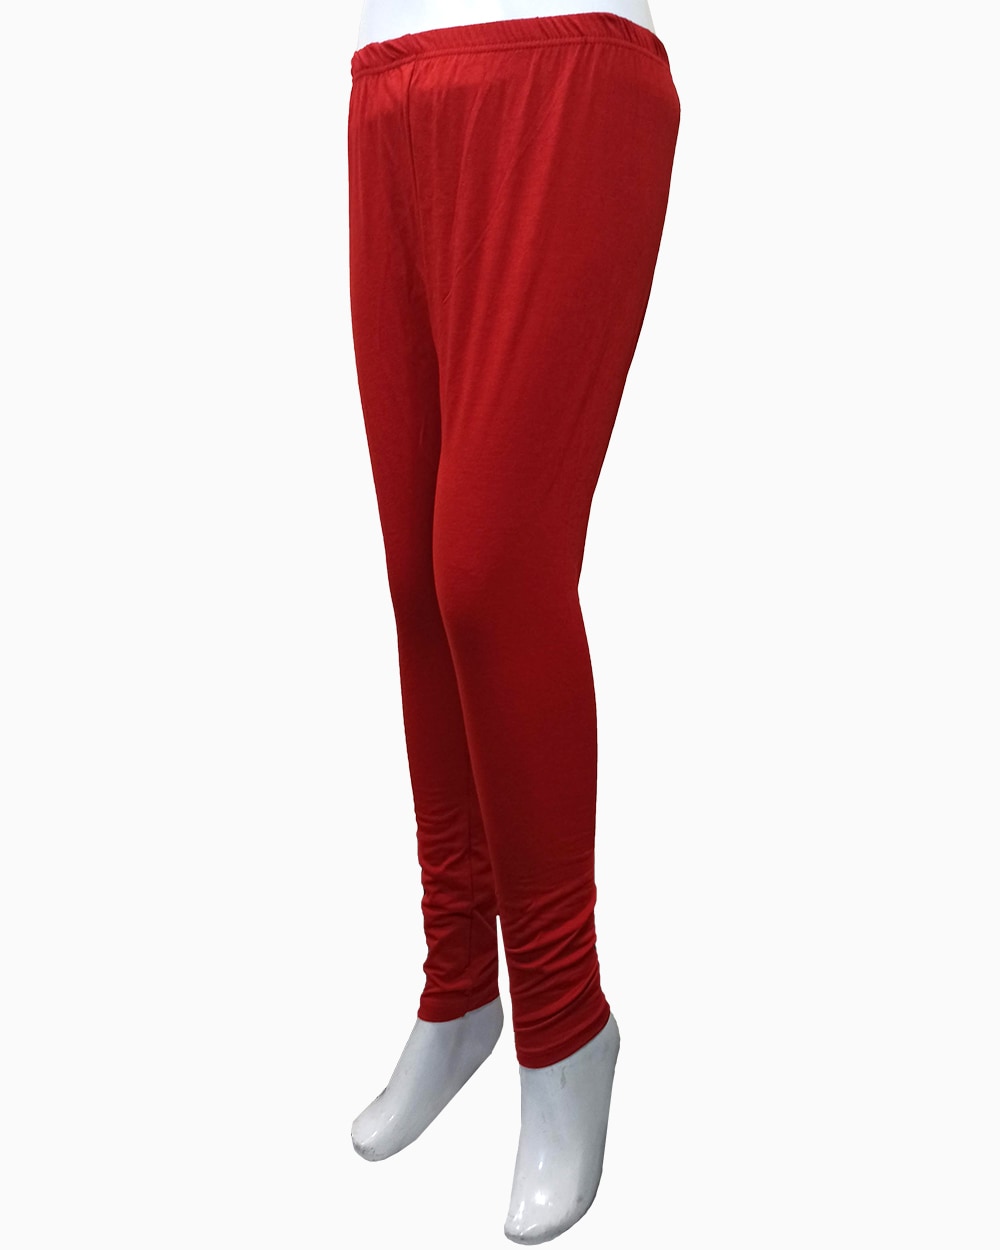 red tights online in pakistan